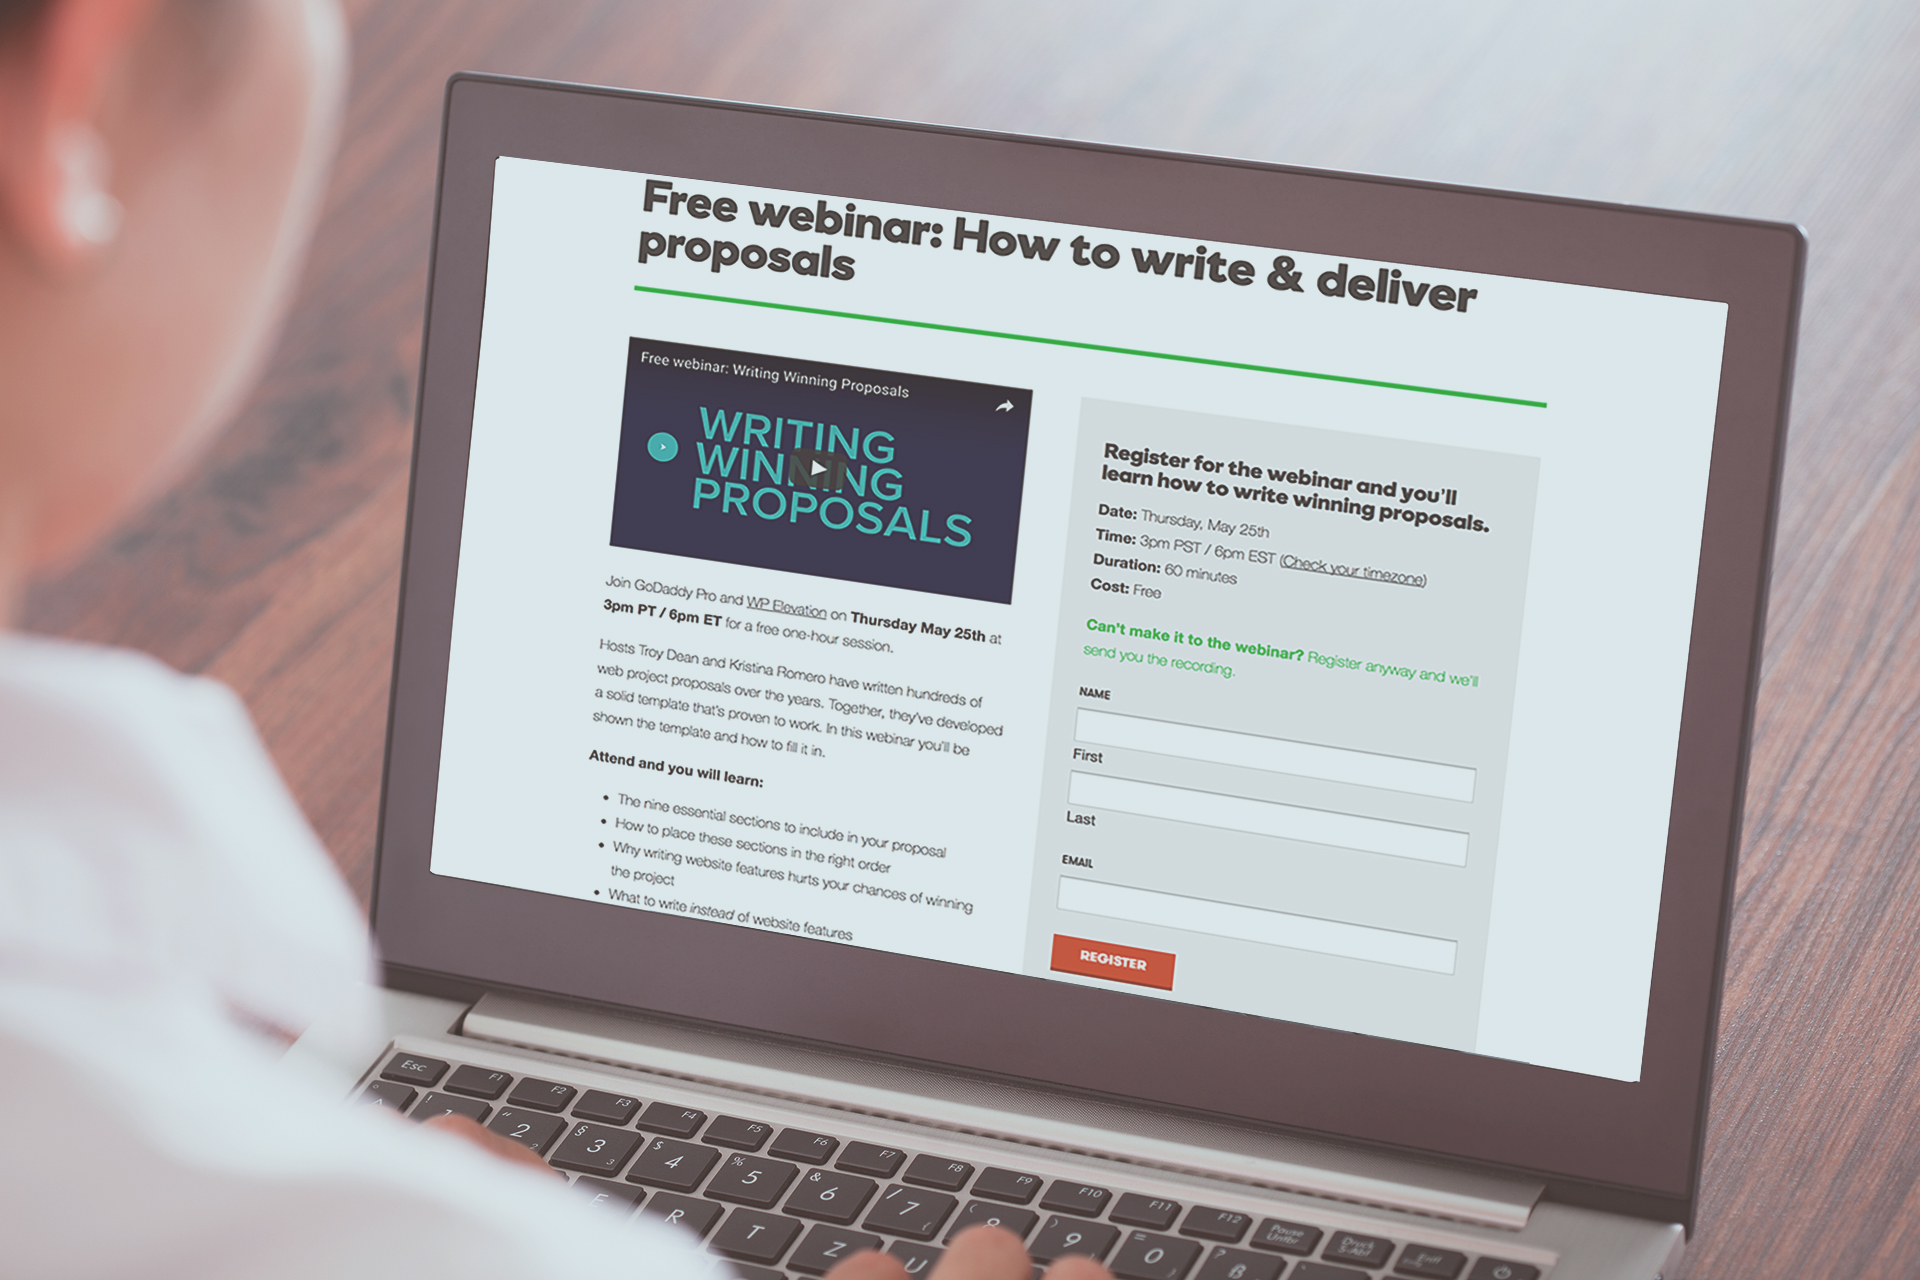 How to write & deliver proposals